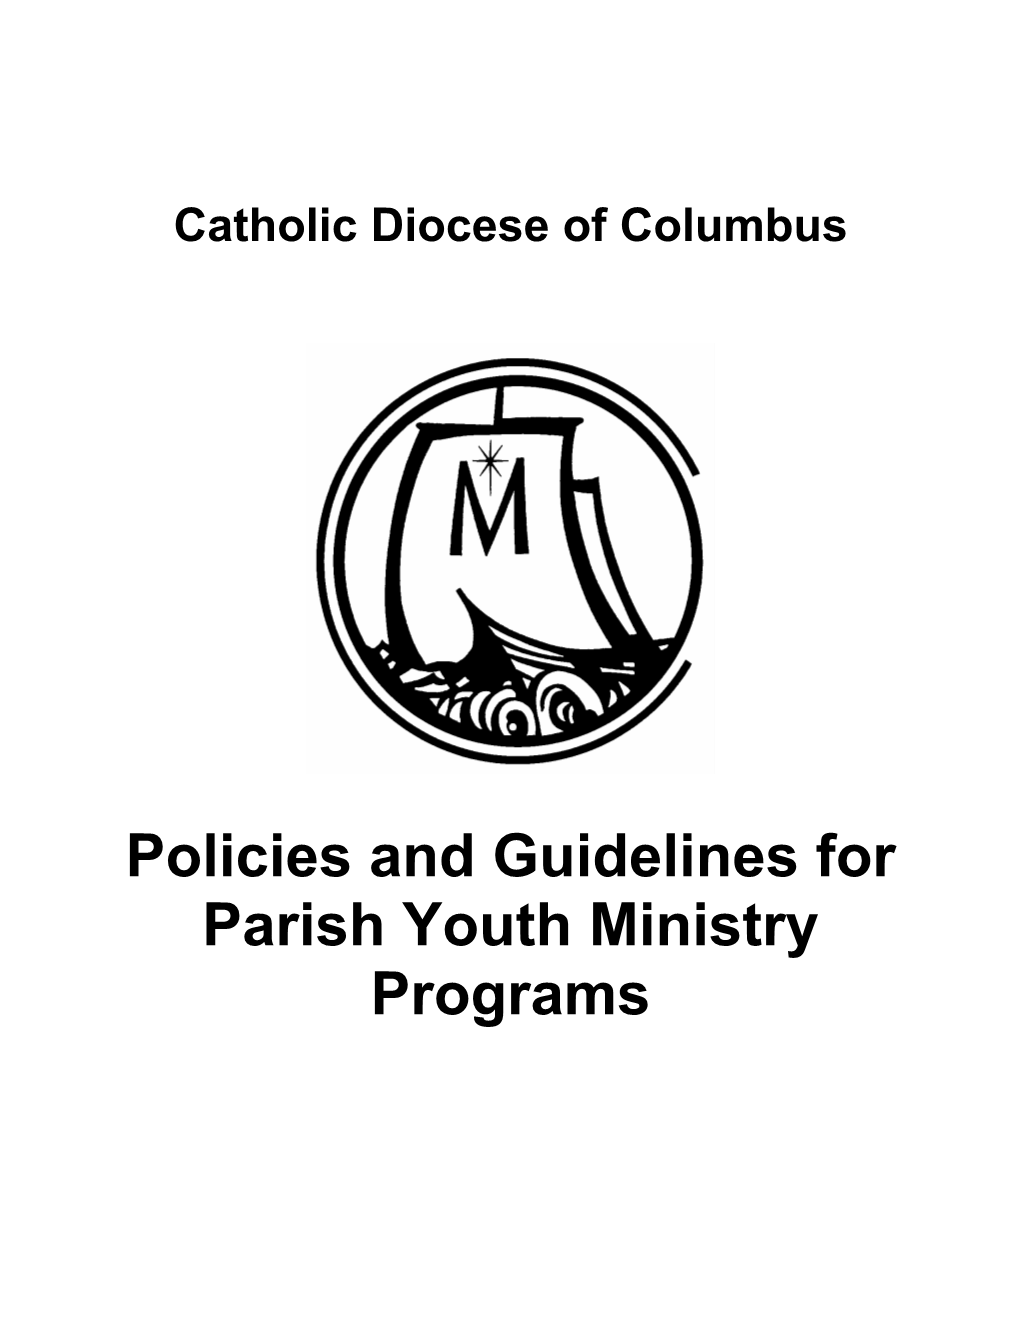 Policies and Guidelines for Parish Youth Ministry Programs